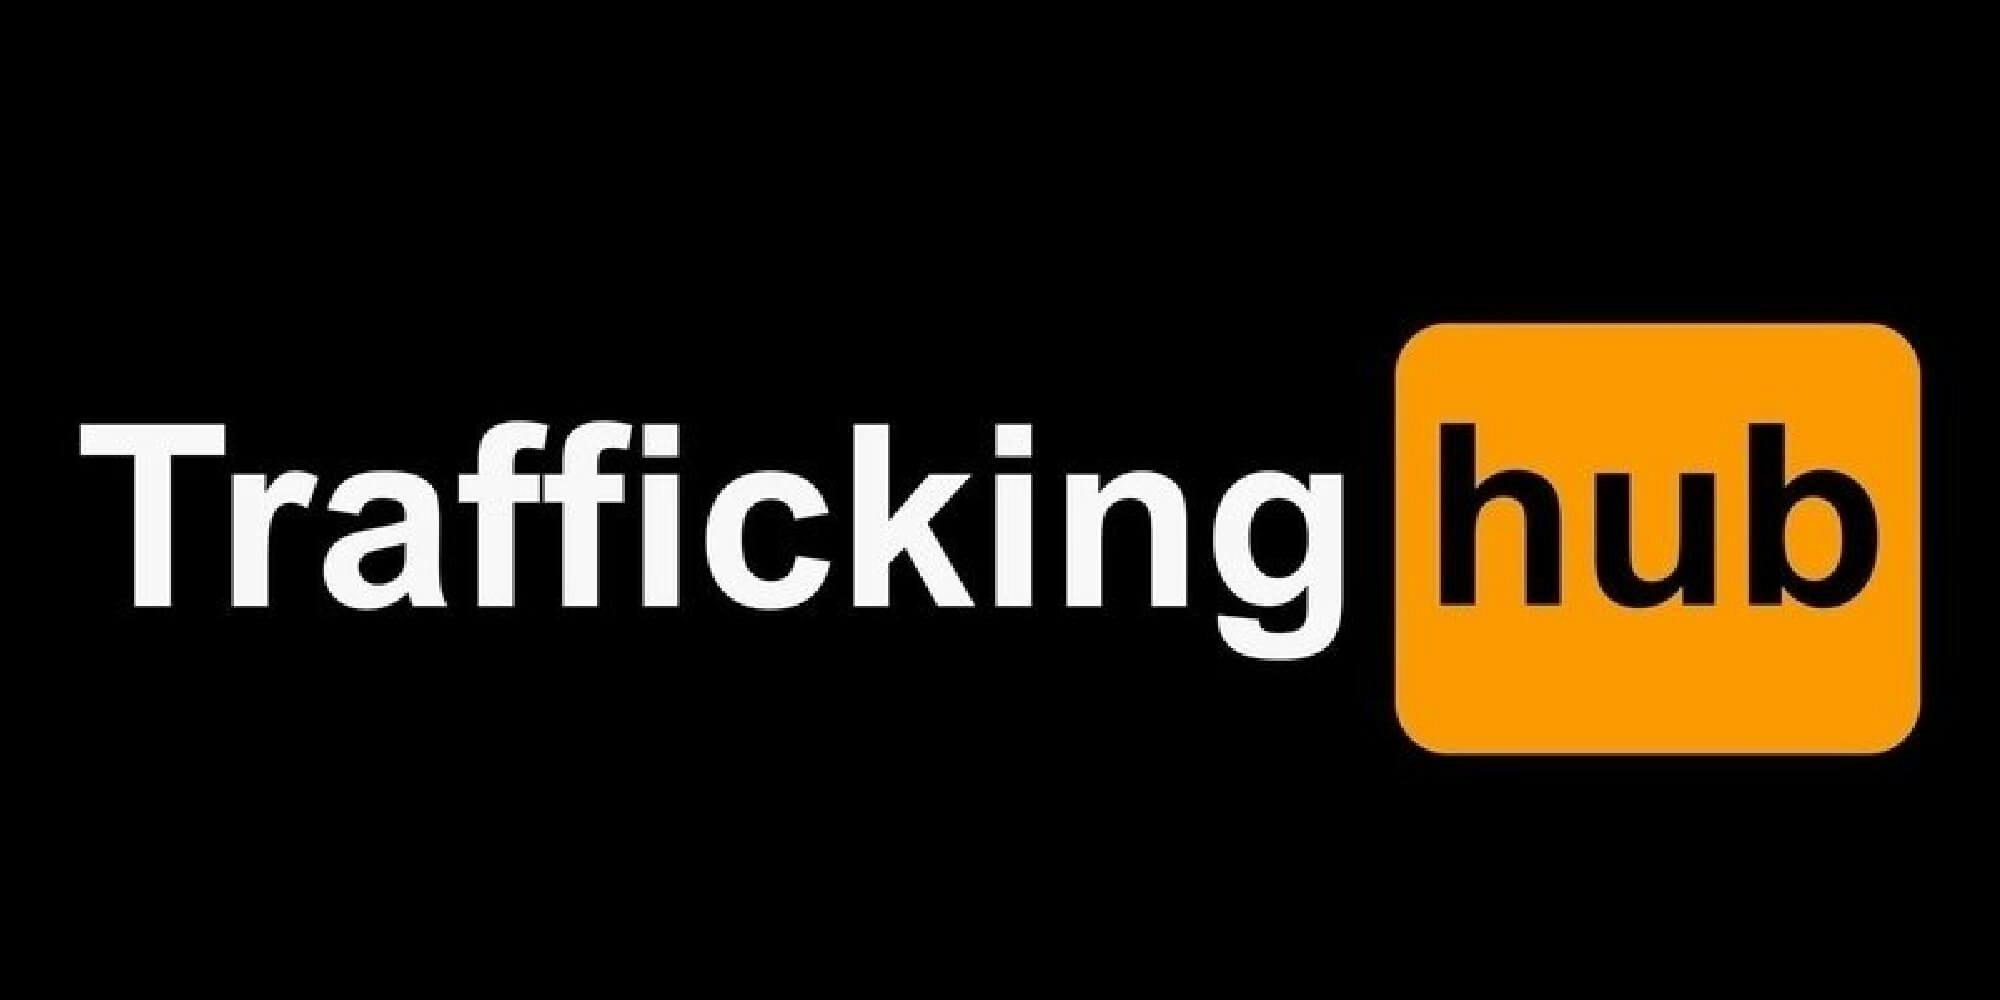 This petition wants Pornhub to be shut down for good